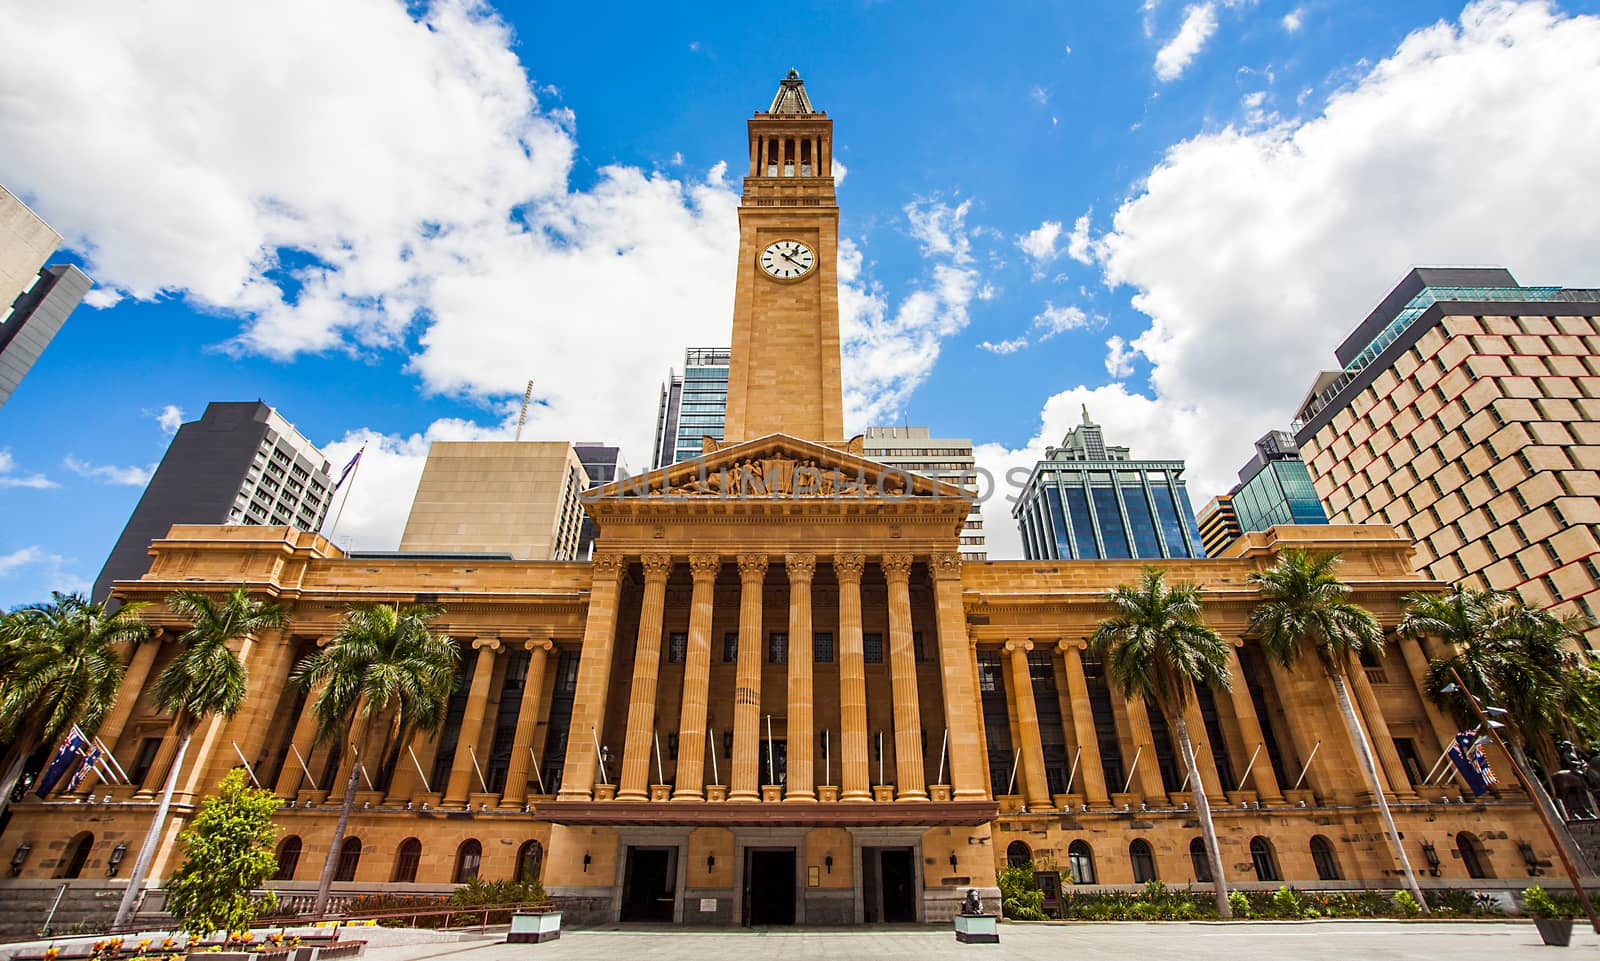 City Hall in Brisbane Australia from King George Square by Makeral